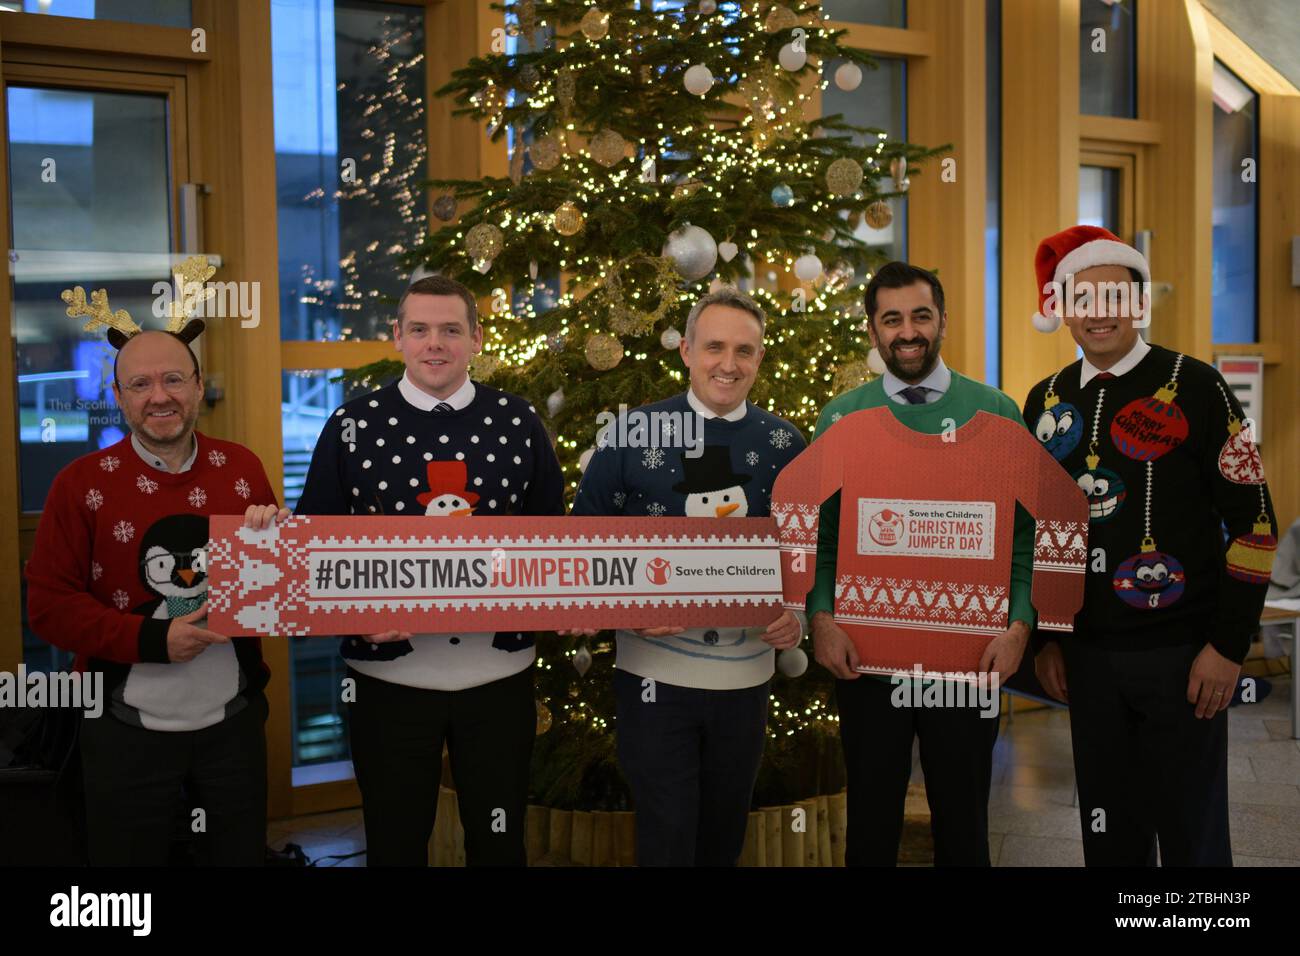 https://c8.alamy.com/comp/2TBHN3P/edinburgh-scotland-uk-07-december-2023-party-leaders-pose-for-save-the-children-christmas-jumper-day-at-the-scottish-parliament-credit-sstalamy-live-news-2TBHN3P.jpg